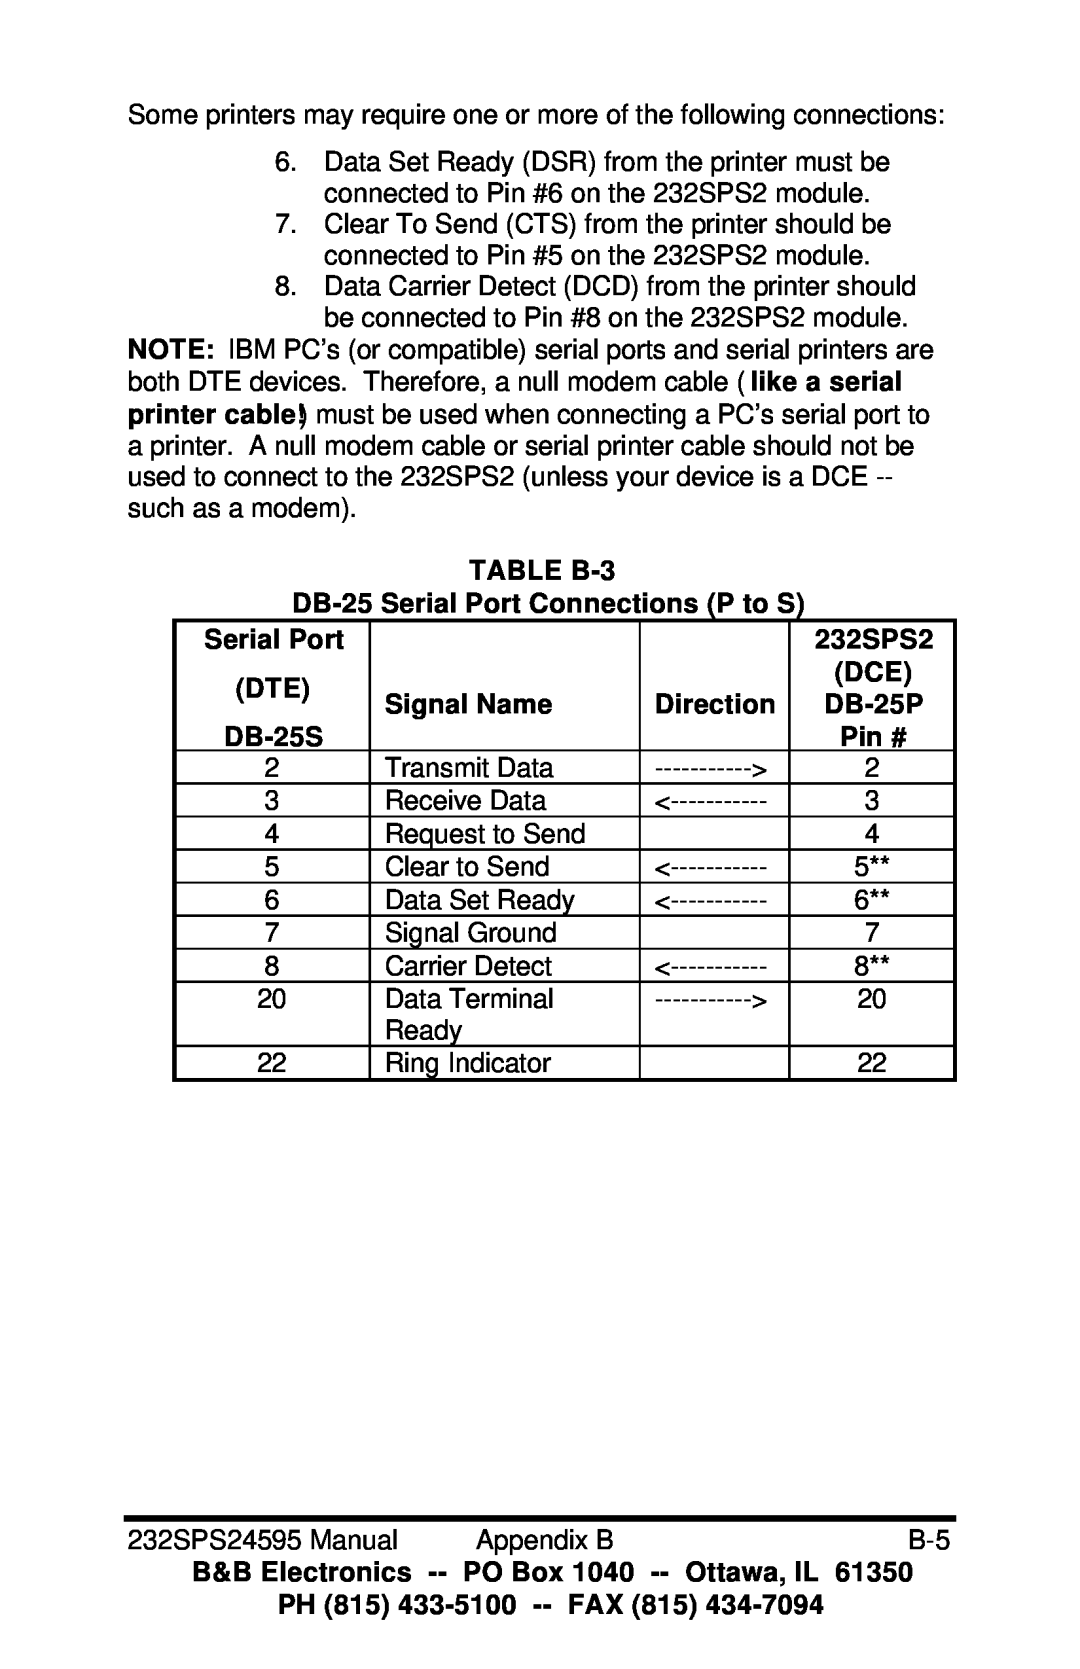 B&B Electronics 232SPS2 TABLE B-3 DB-25 Serial Port Connections P to S, DB-25P, DB-25S, Signal Name, Direction, Pin # 